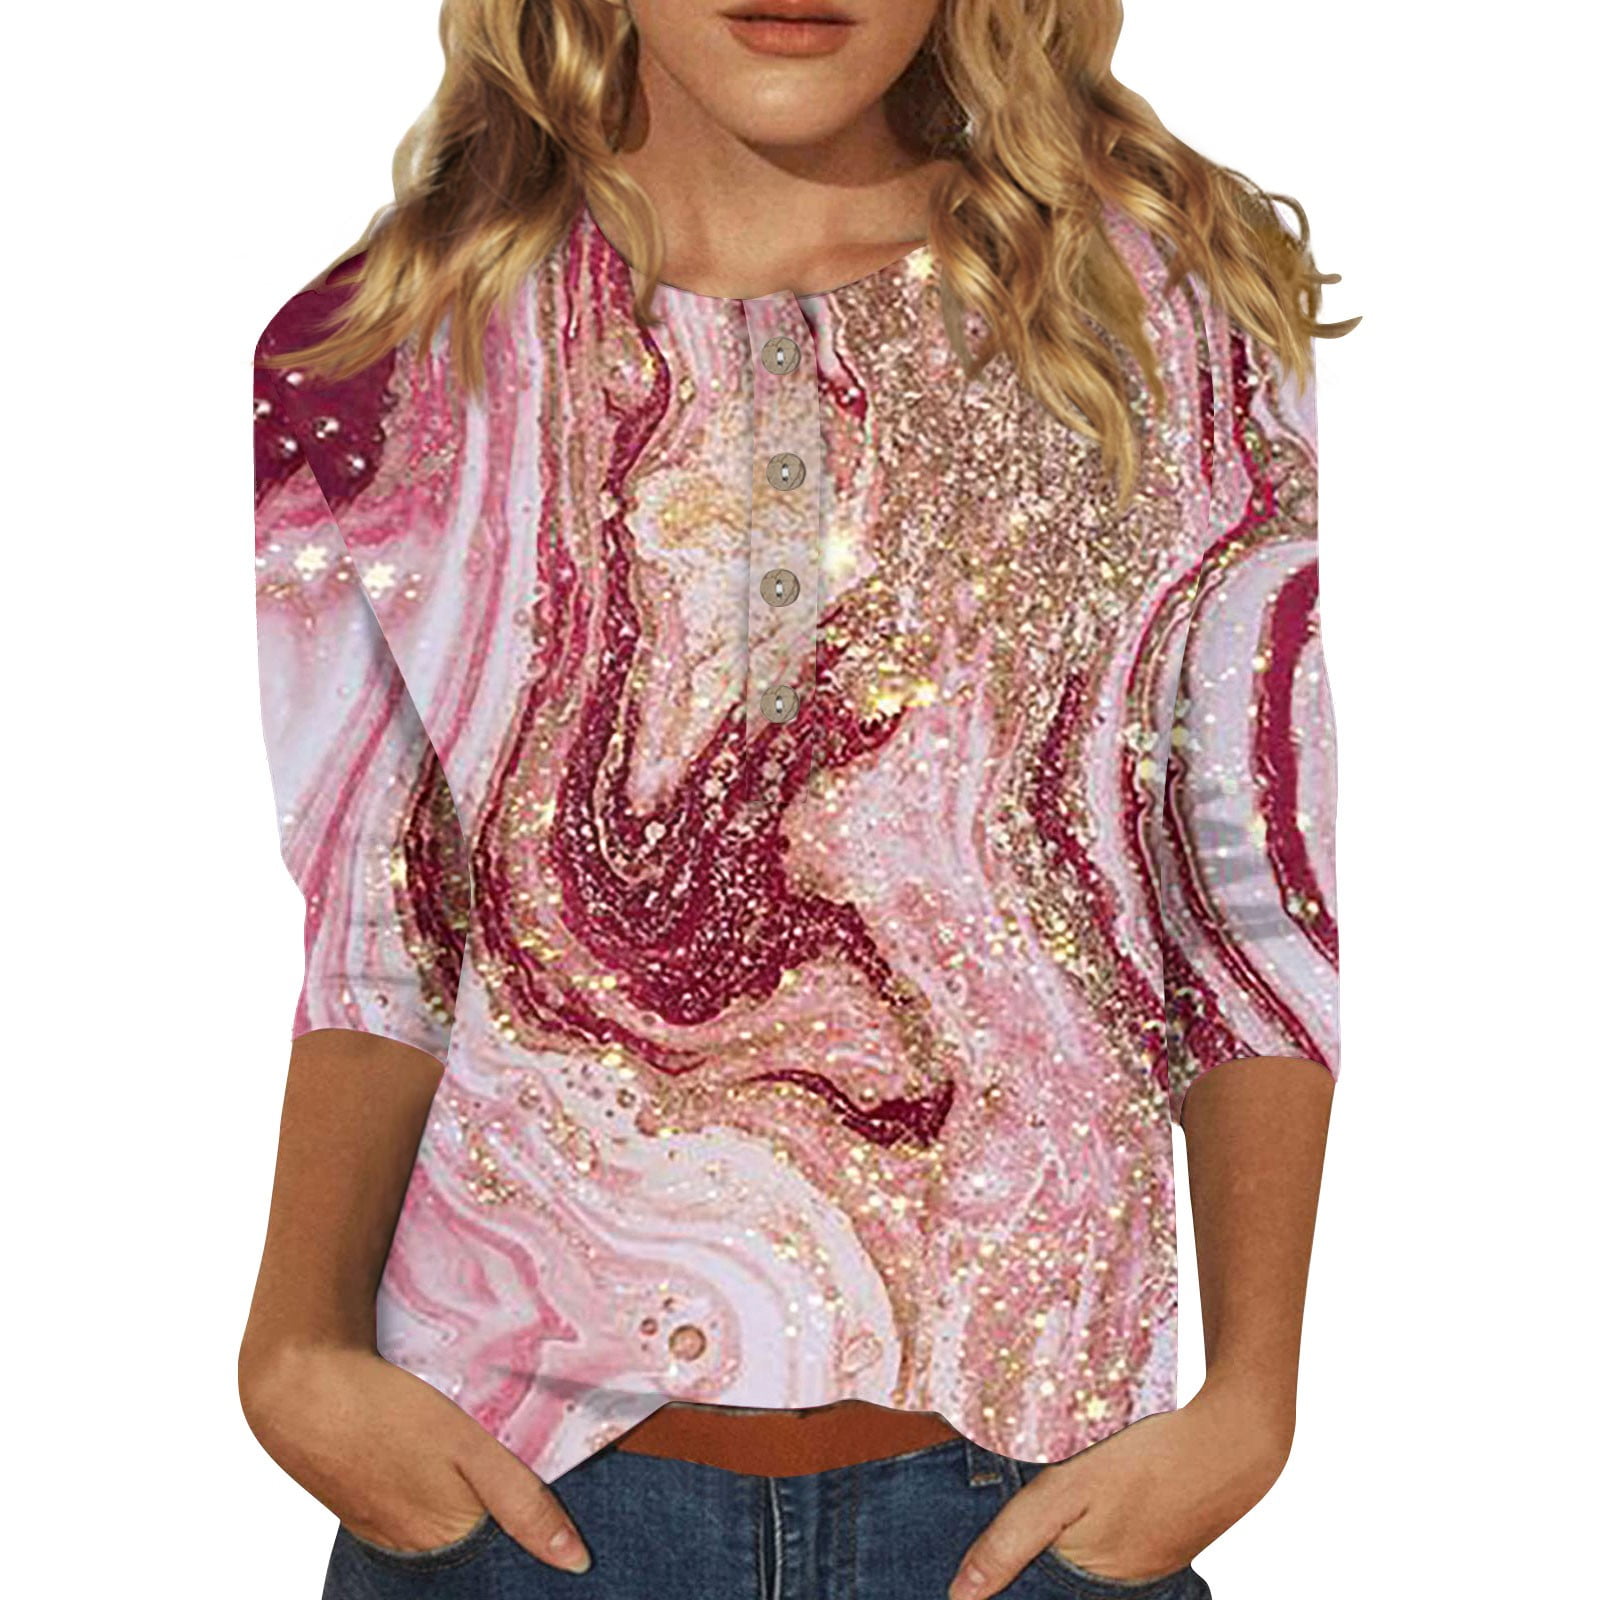 Sksloeg Womens Blouse Plus Size Tops and Blouses, Womens Casual Tops,  Women's V-Neck Floral Print Tunic Tops Button Lace Short Sleeve Tops  T-Shirt Blouse,Rose Gold M 